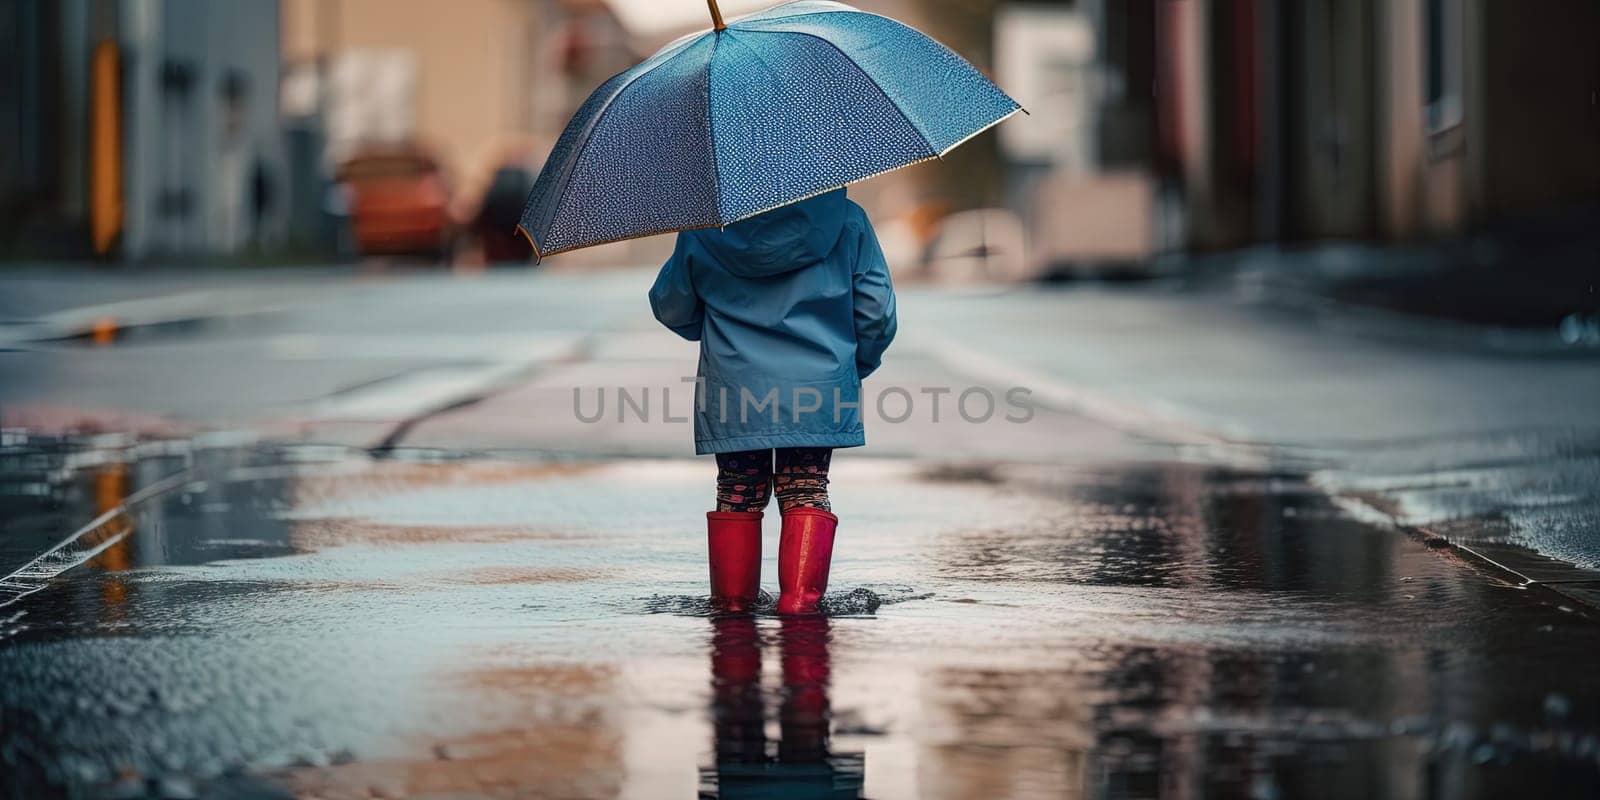 Child Stands In A Puddle Under An Umbrella During The Rain by tan4ikk1